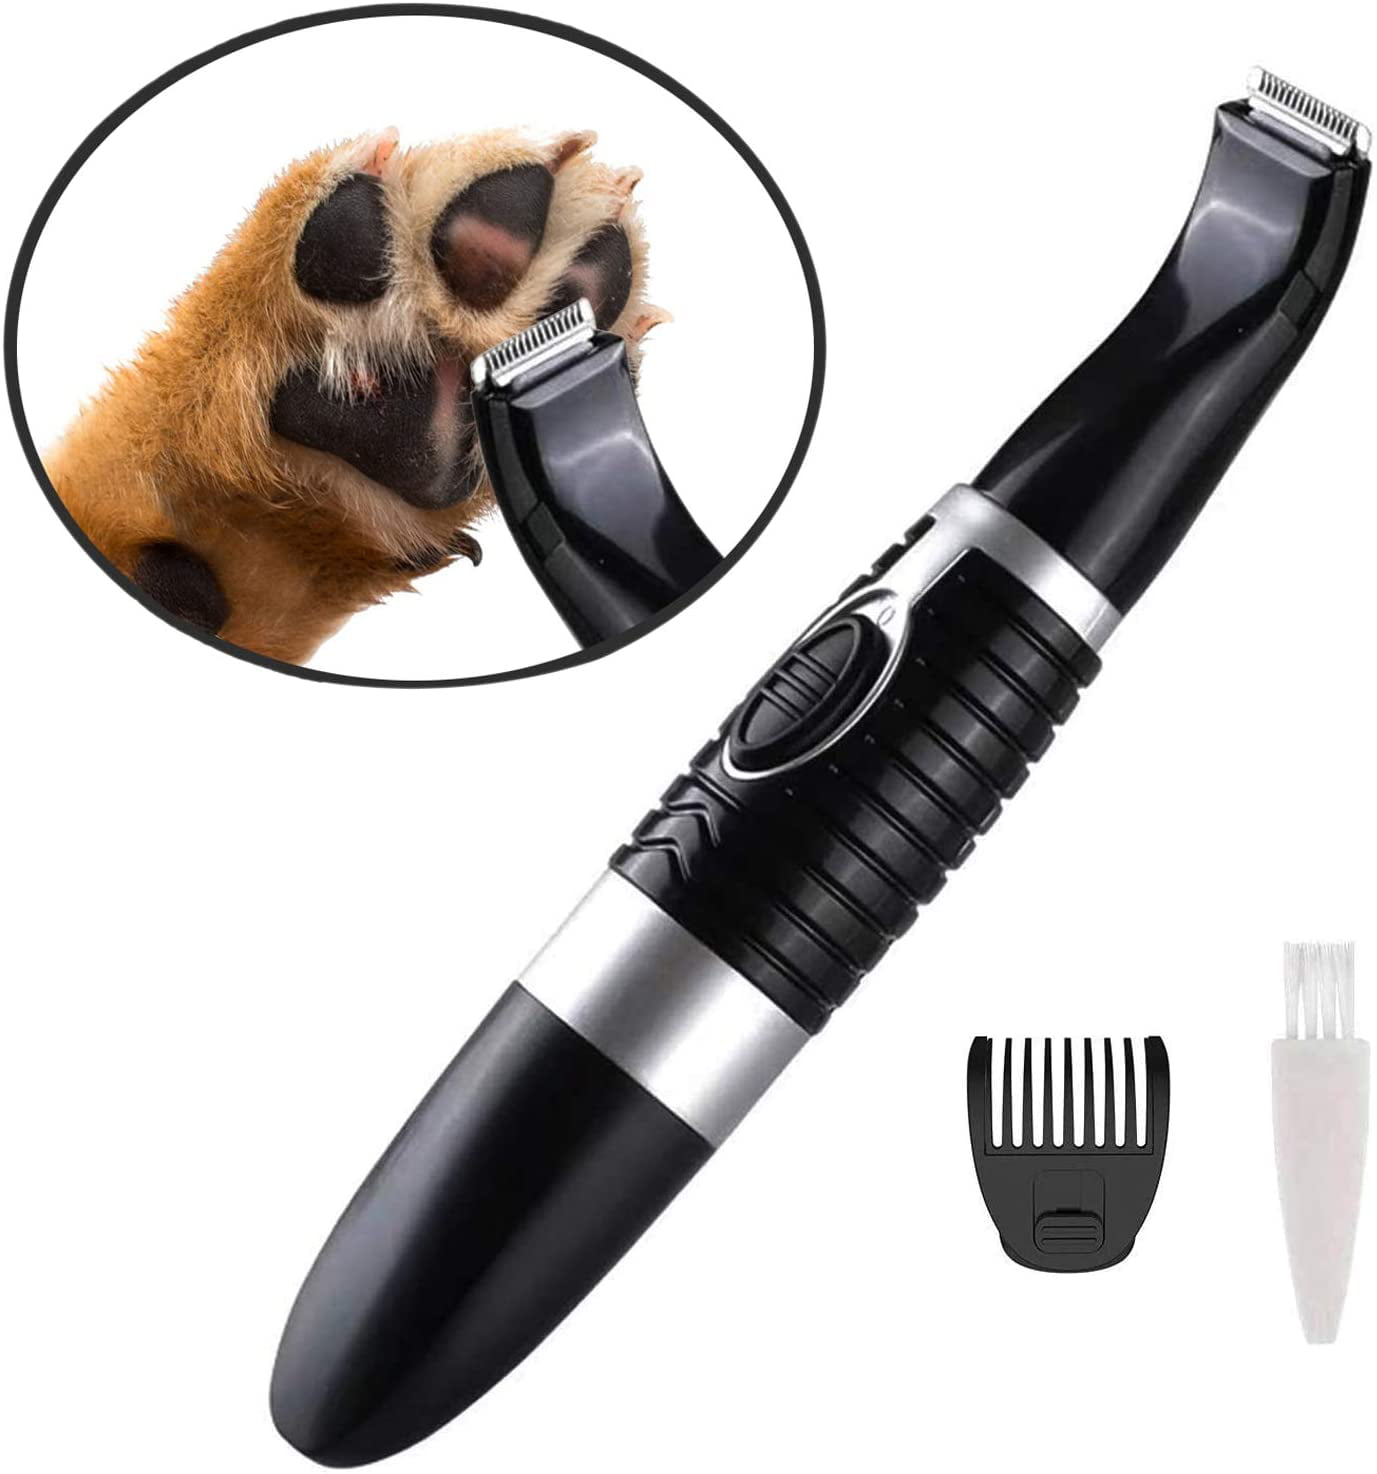 professional clippers for dog grooming